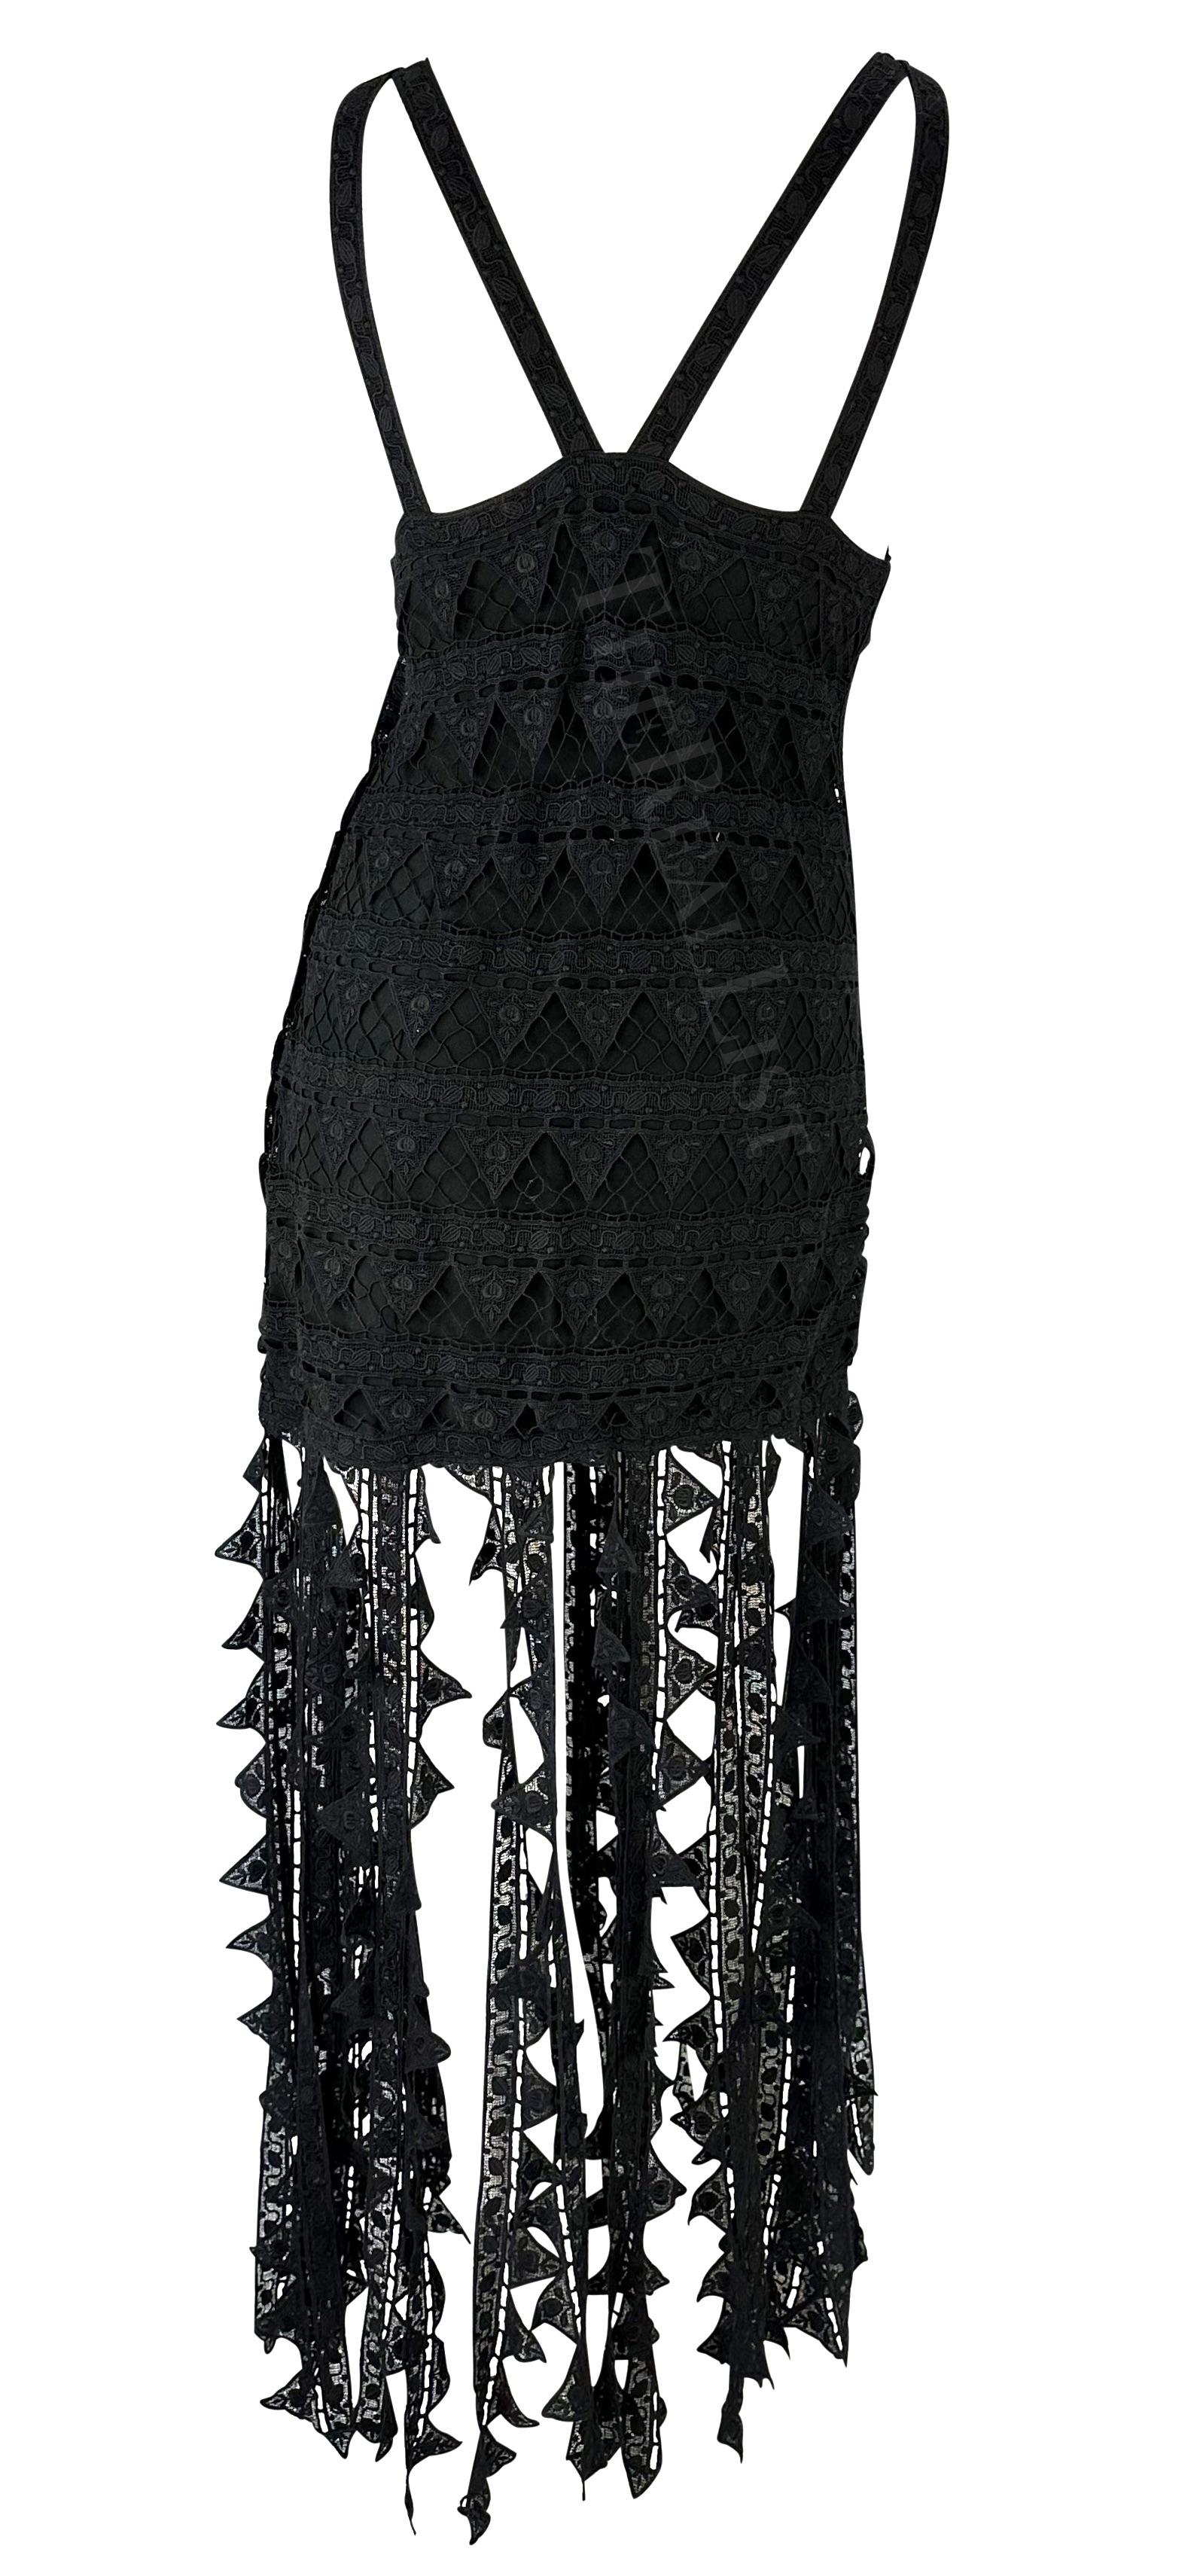 S/S 1993 Chloé by Karl Lagerfeld Runway Black Floral Triangle Lace Dress For Sale 4